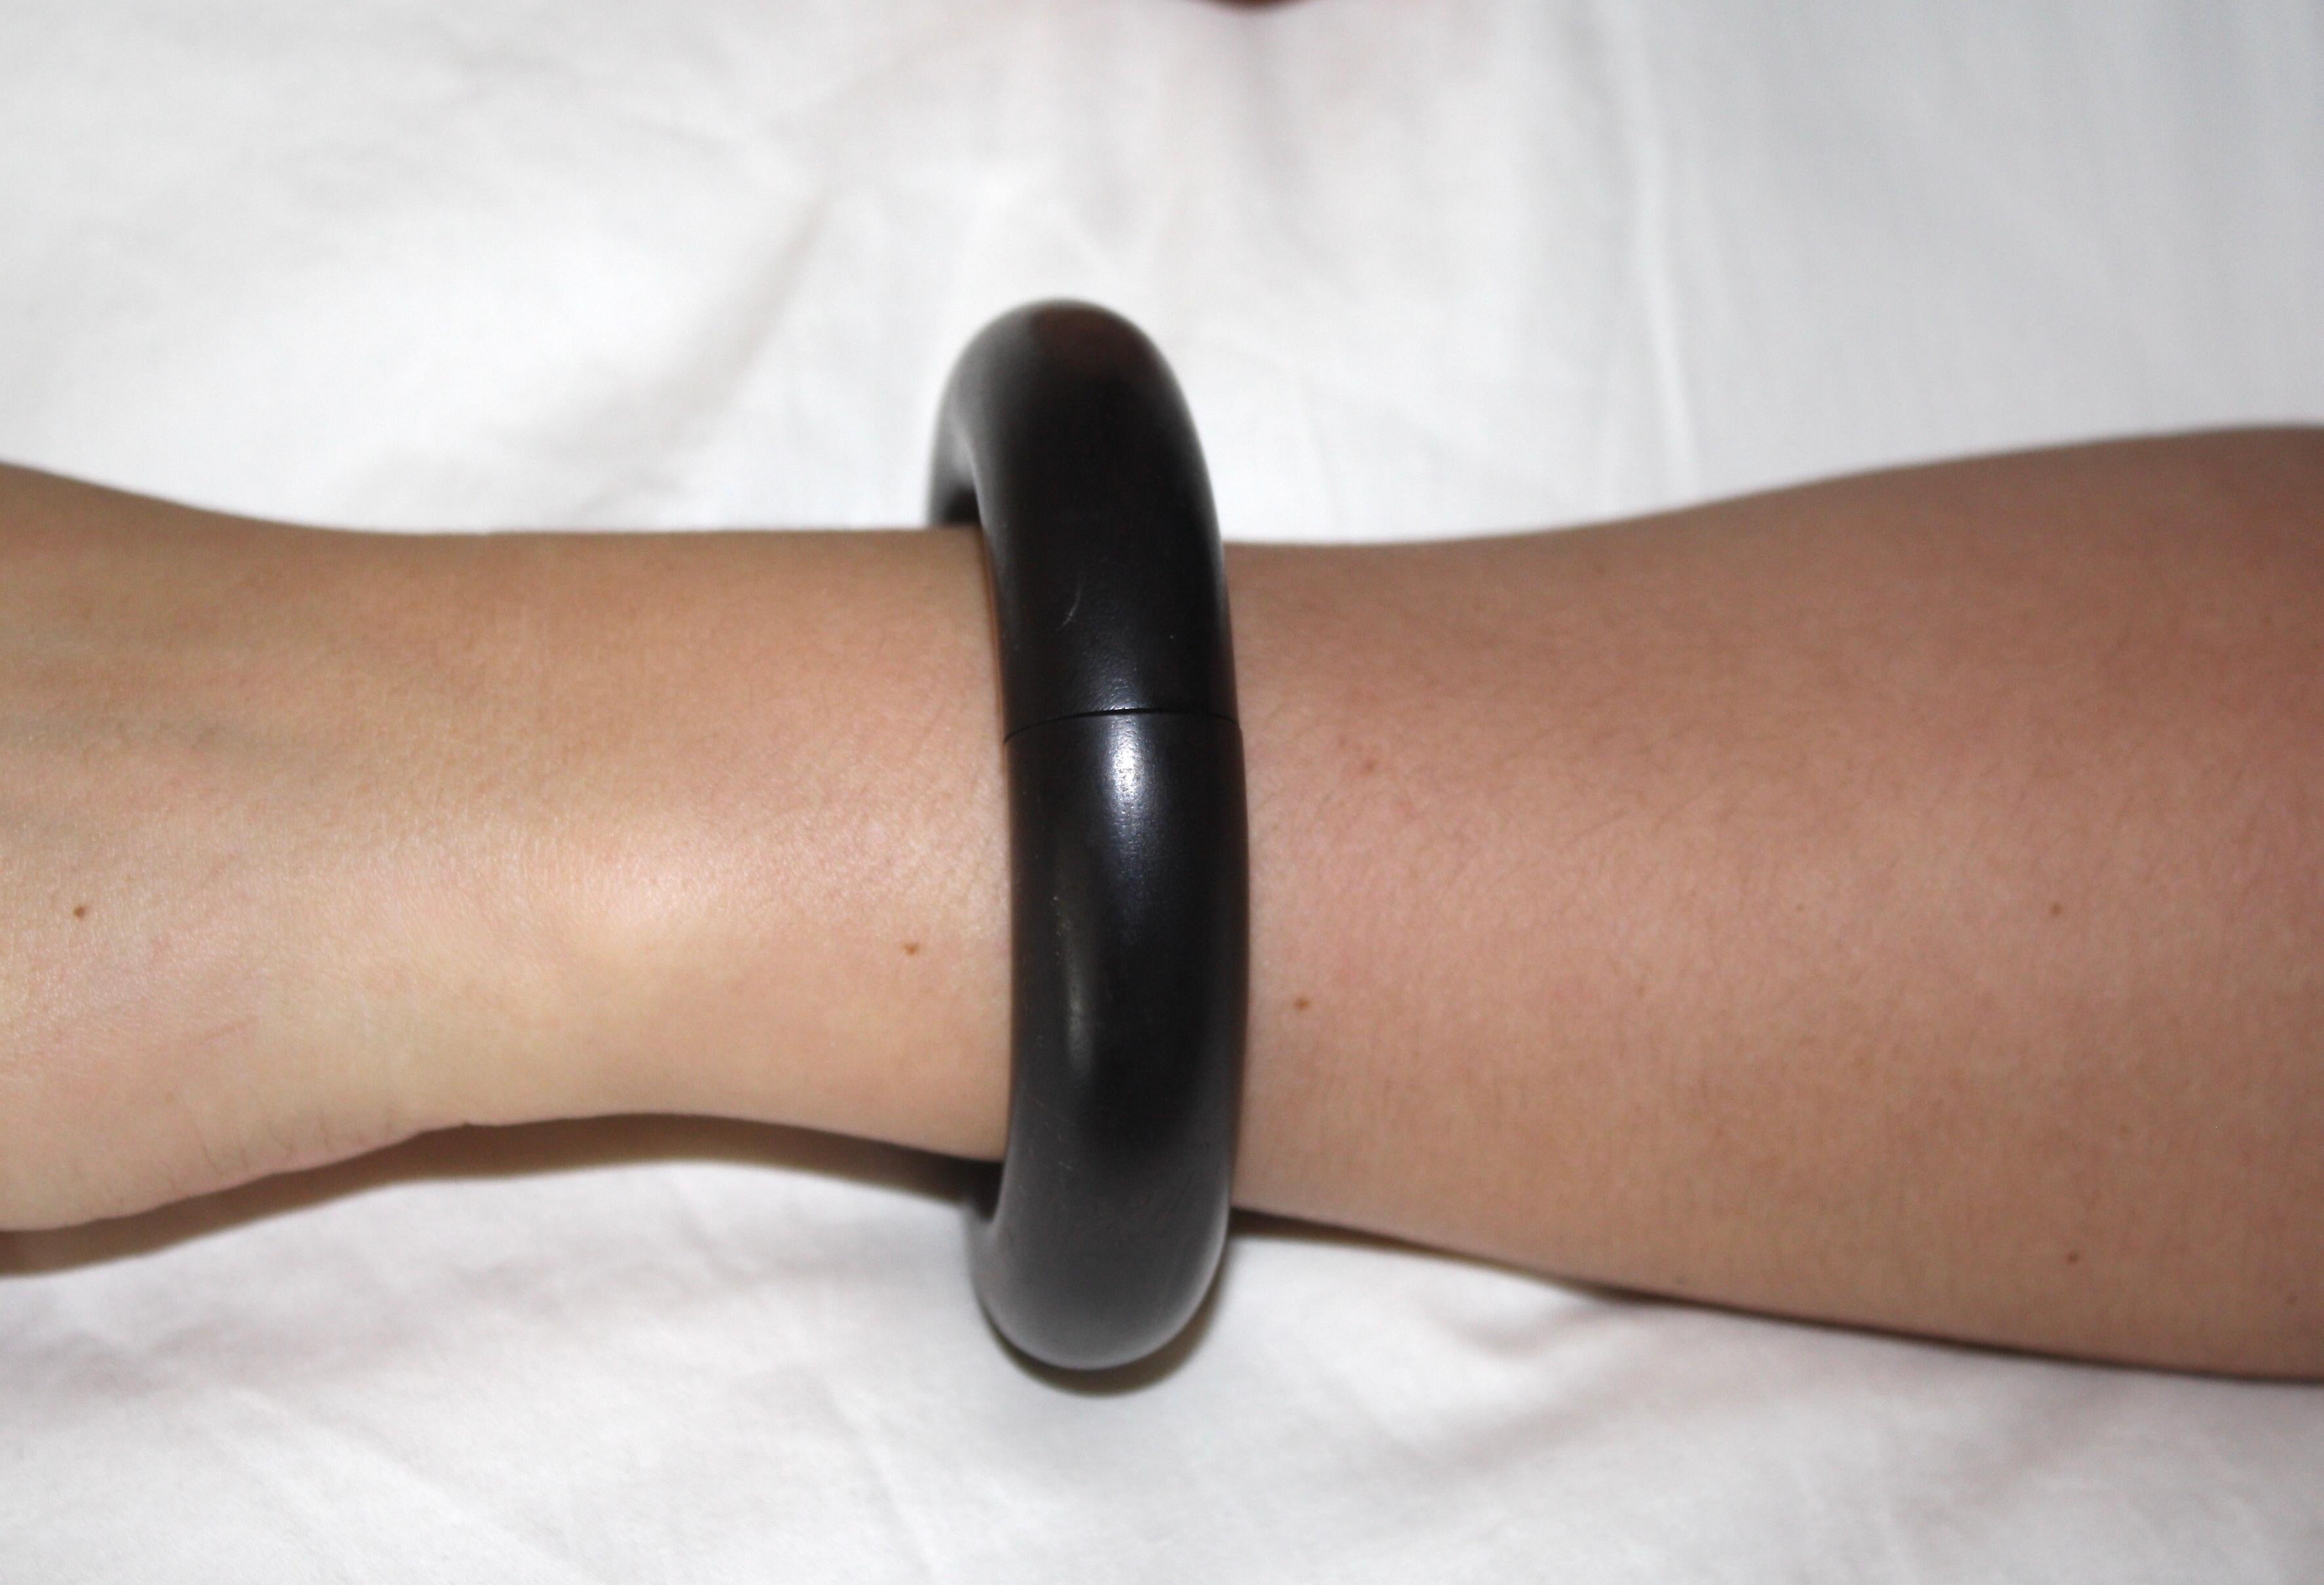 Ebony wood statement bangle with elastic interior allowing for fit on all hand sizes. Made by Monies, Denmark. 